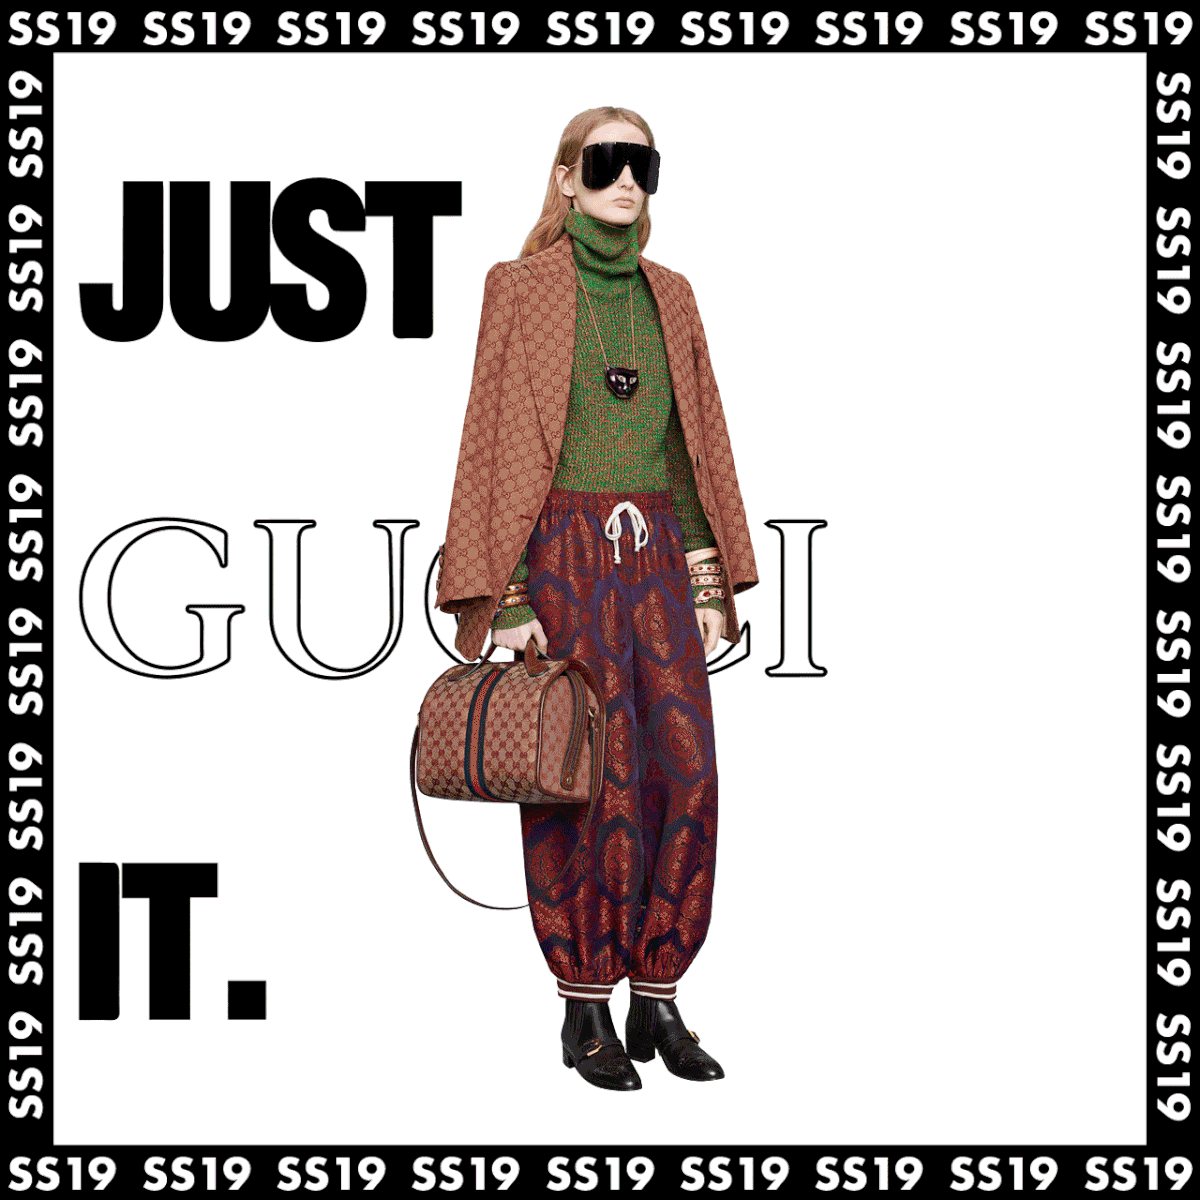 gucci poster Nike Fashion  graphicdesign graphism graphisme gif Mode affiche